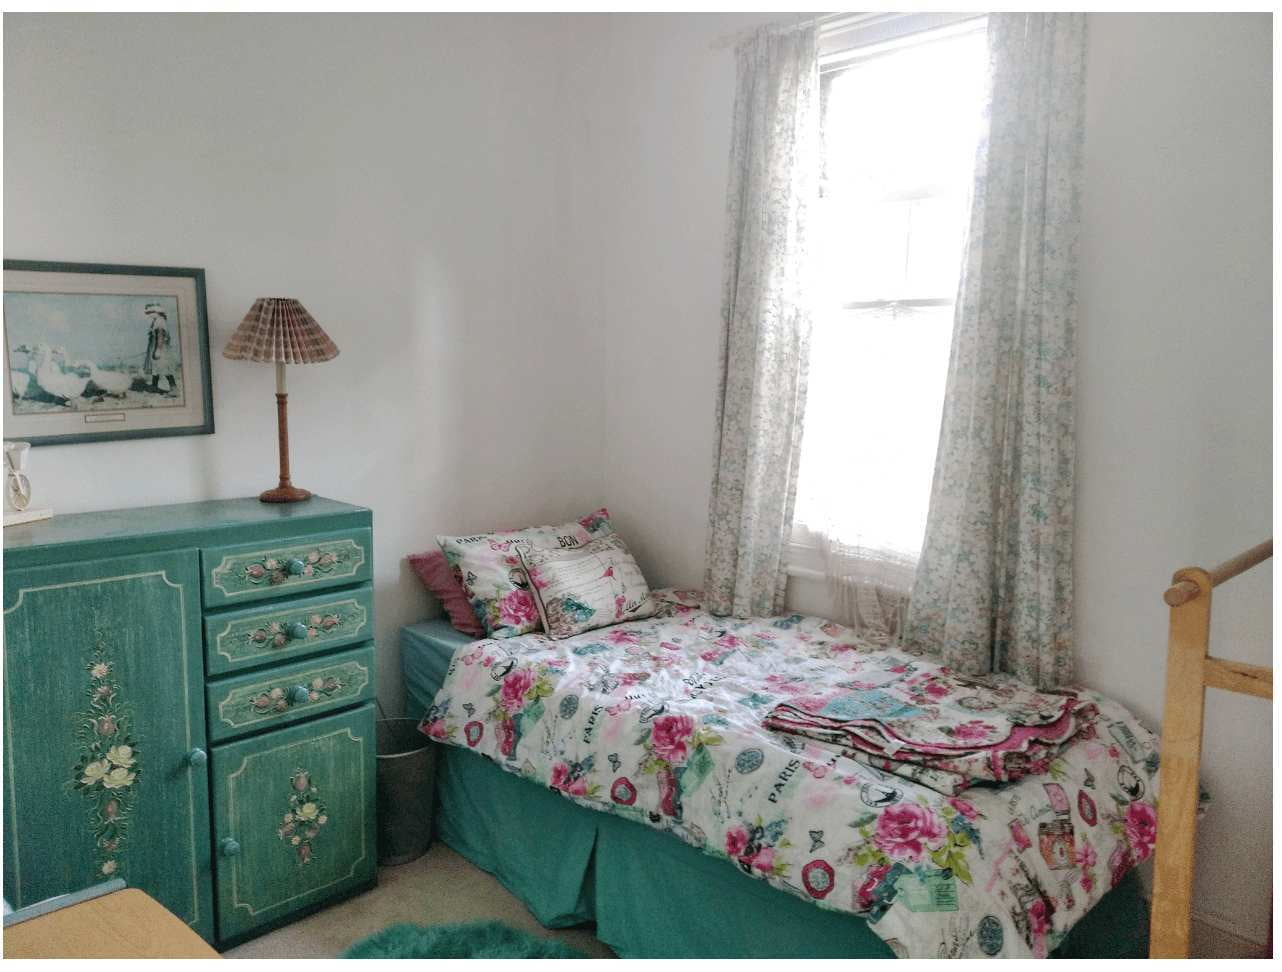 Room for one with drawers and a window | Host Family Stay